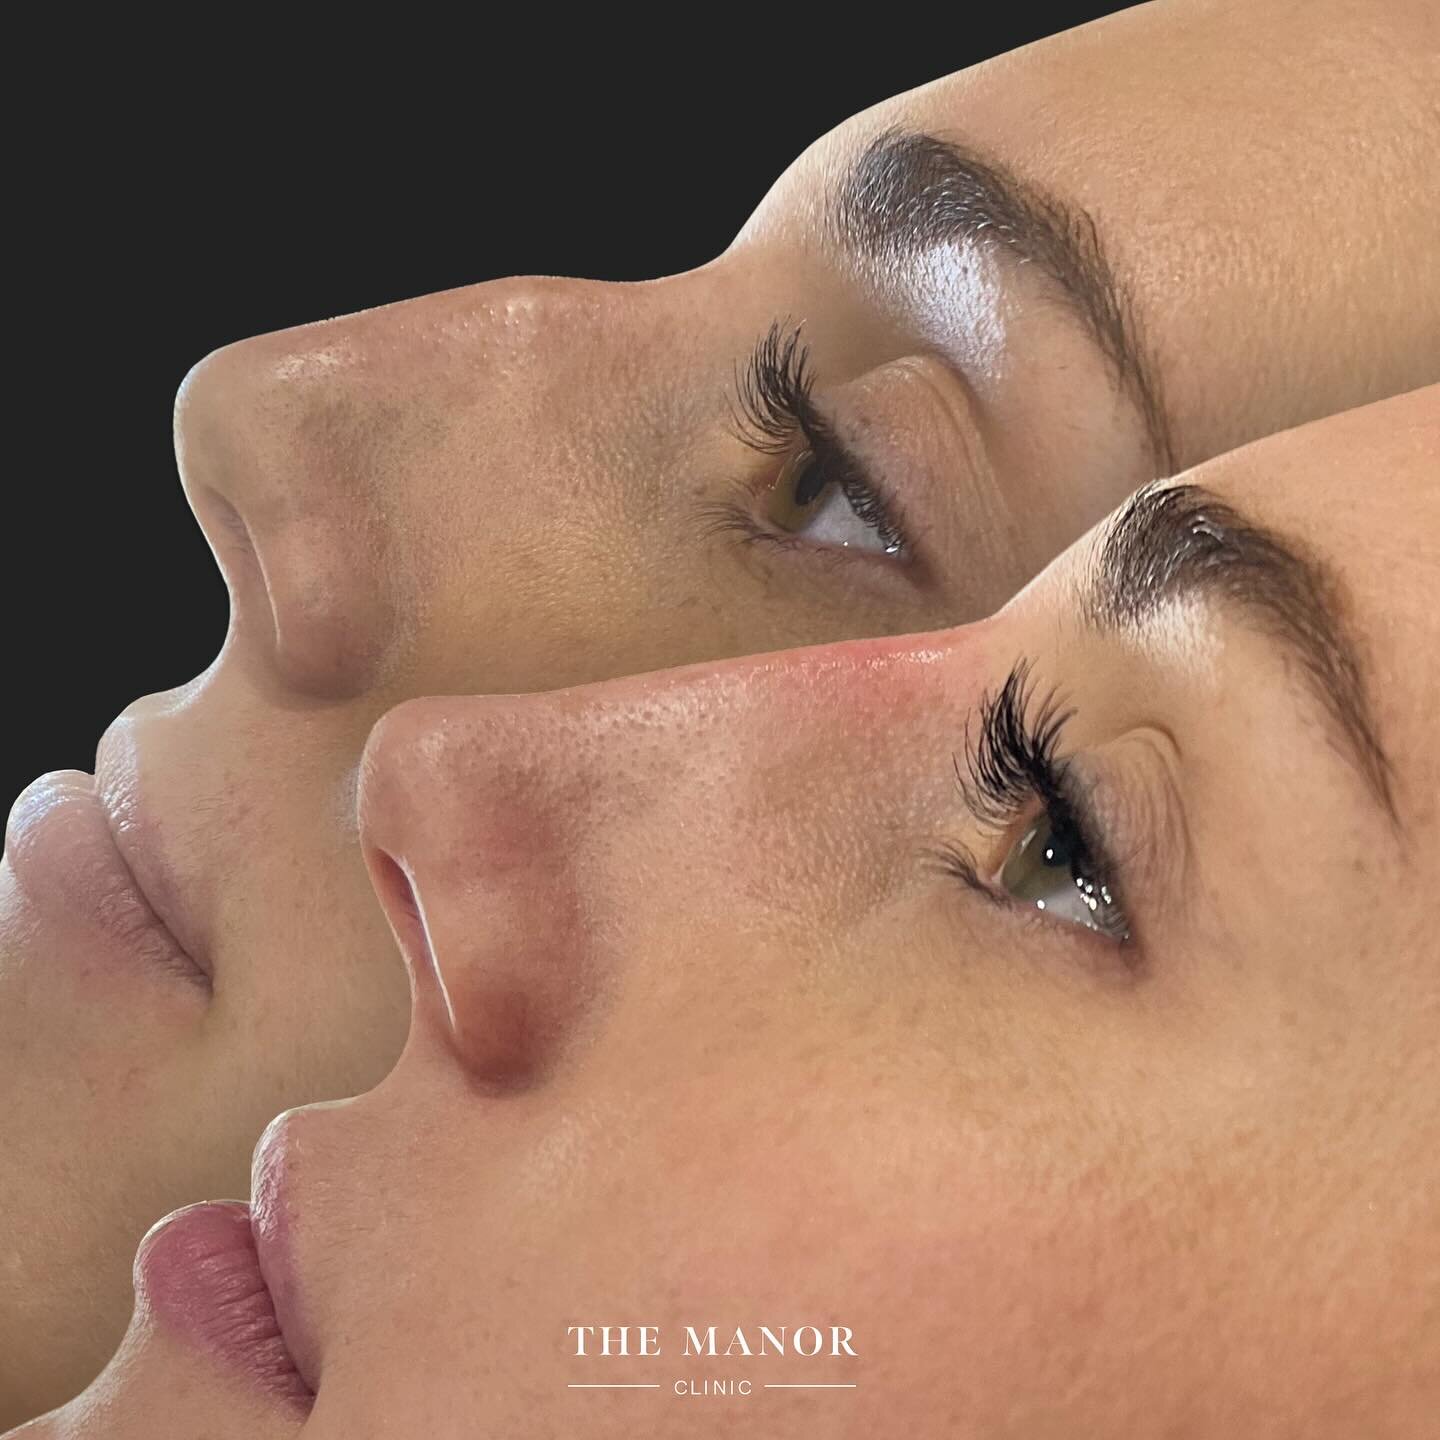 ⚖️ NOSE BALANCE ⚖️ 

Non-surgical rhinoplasty uses dermal filler to reduce the appearance of nasal hooks, bumps whilst disguising prominent bridges. This treatment also has the ability to add definition and lift downward turning nose tips. 

At The M